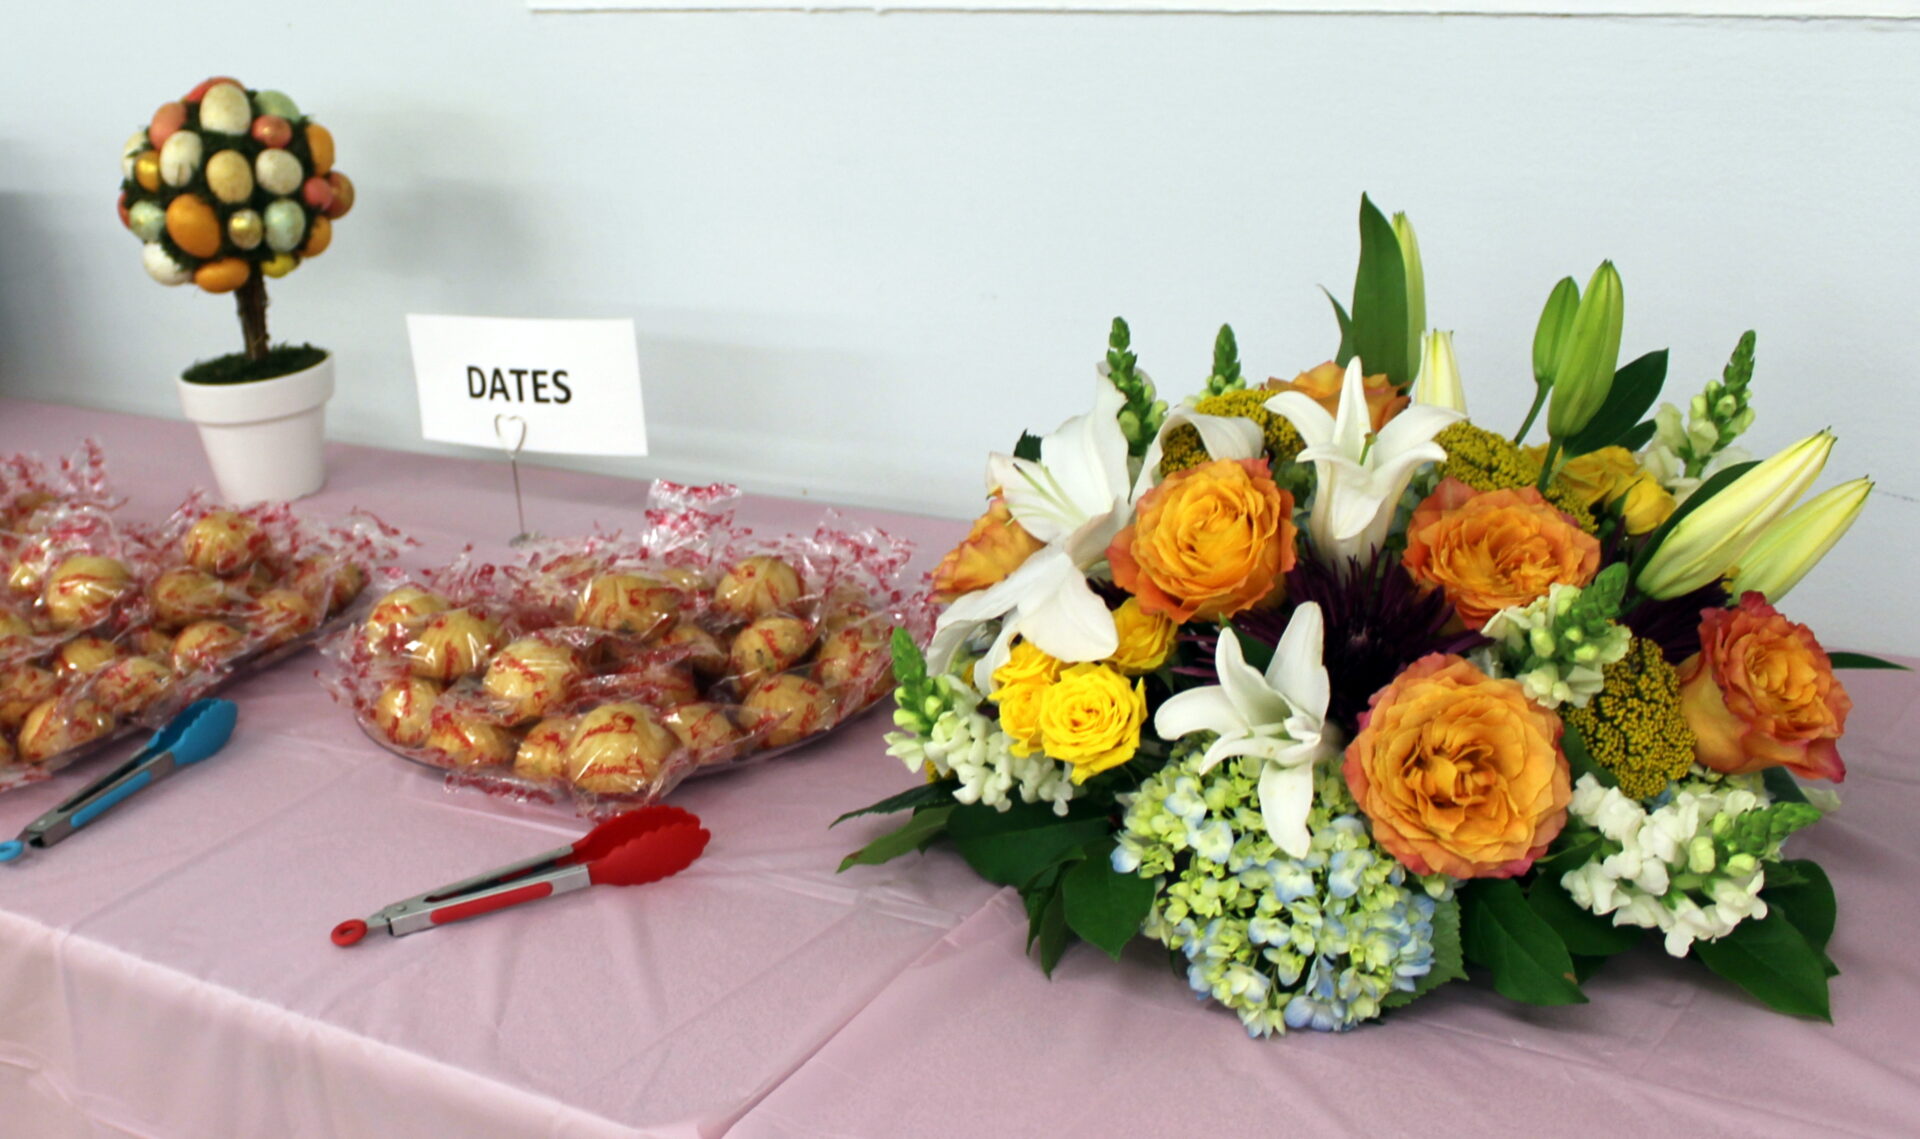 A table with dates and a bunch of flowers